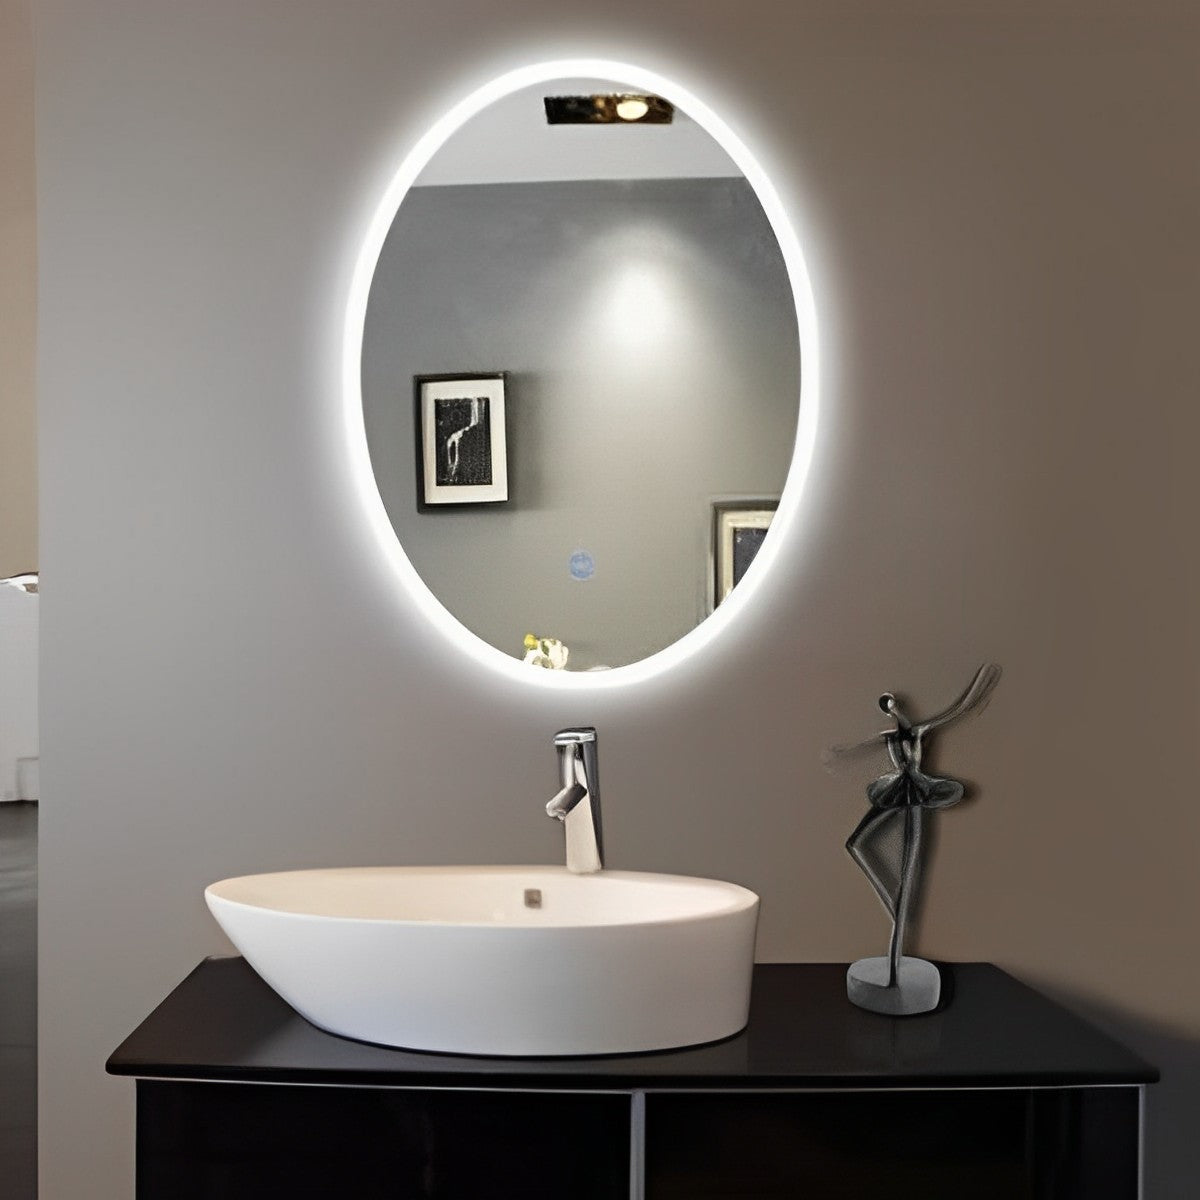 24" Oval Mirror with LED Light MSL-807 - RenoShop